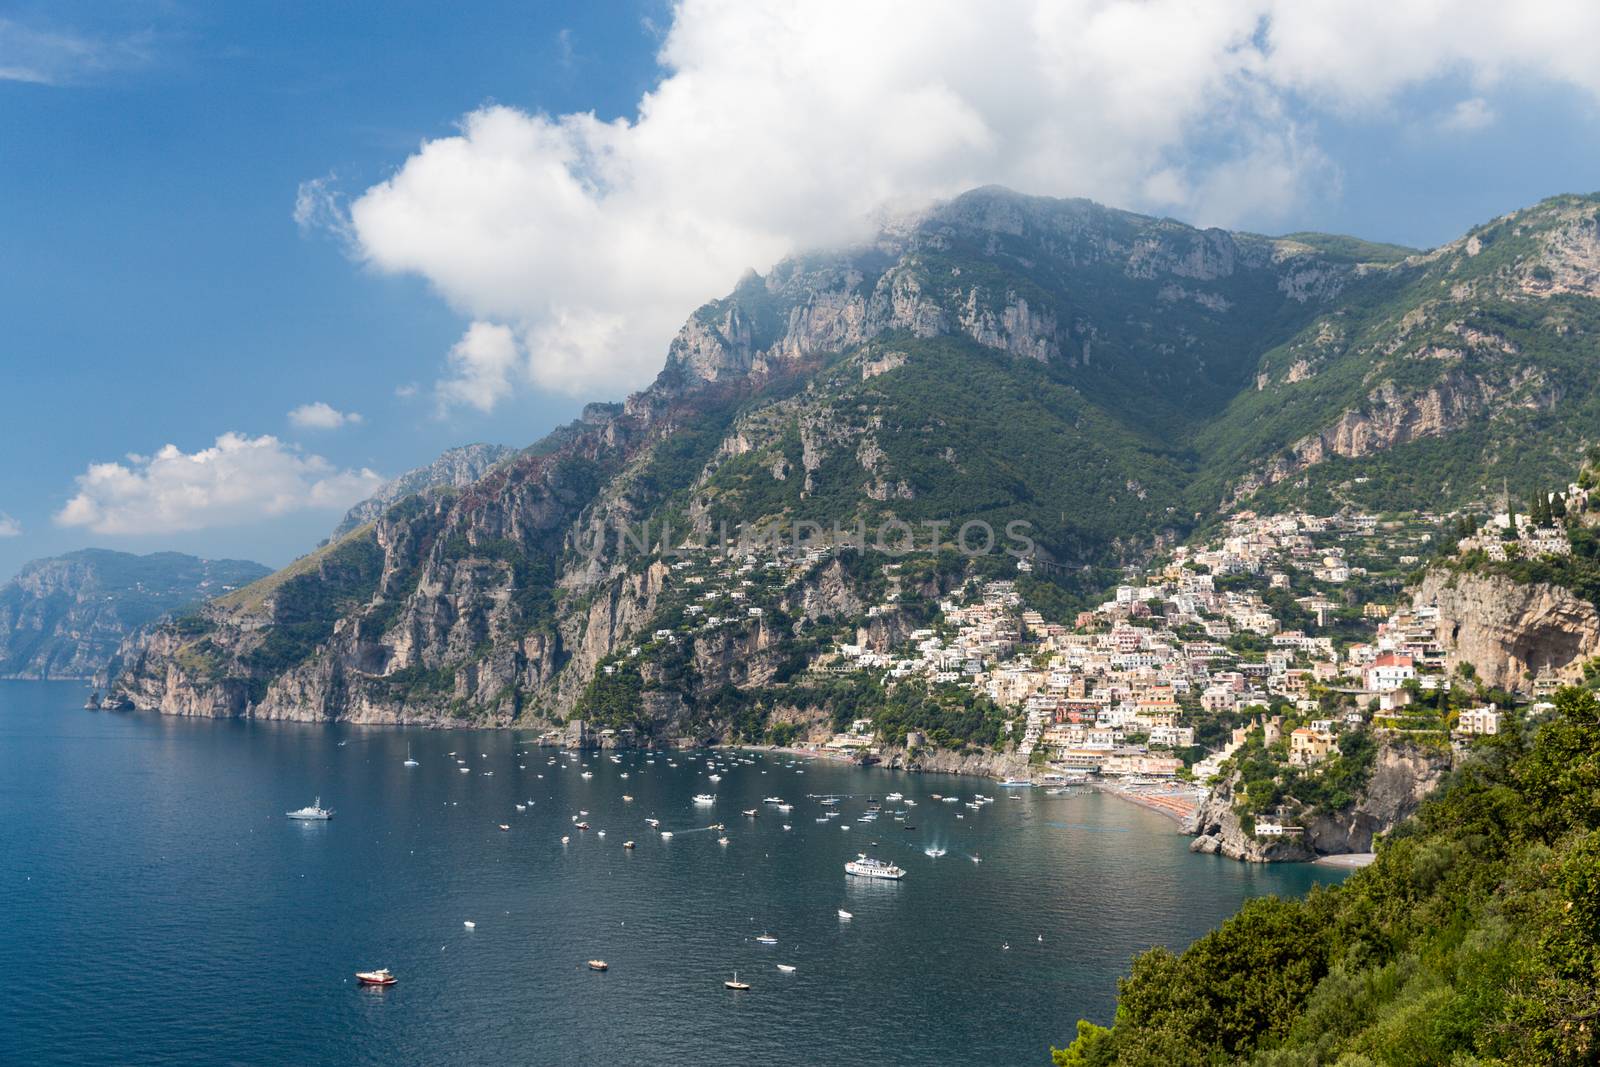 Scenic view of the Amalfi Coast in Italy.  The Amalfi Coast (Italian: Costiera Amalfitana) is a stretch of coastline on the southern coast of the Sorrentine Peninsula in the Province of Salerno in Southern Italy. The Amalfi Coast is a popular tourist destination for the region and Italy as a whole, attracting thousands of tourists annually.  In 1997, the Amalfi Coast was listed as a UNESCO World Heritage Site as a cultural landscape.